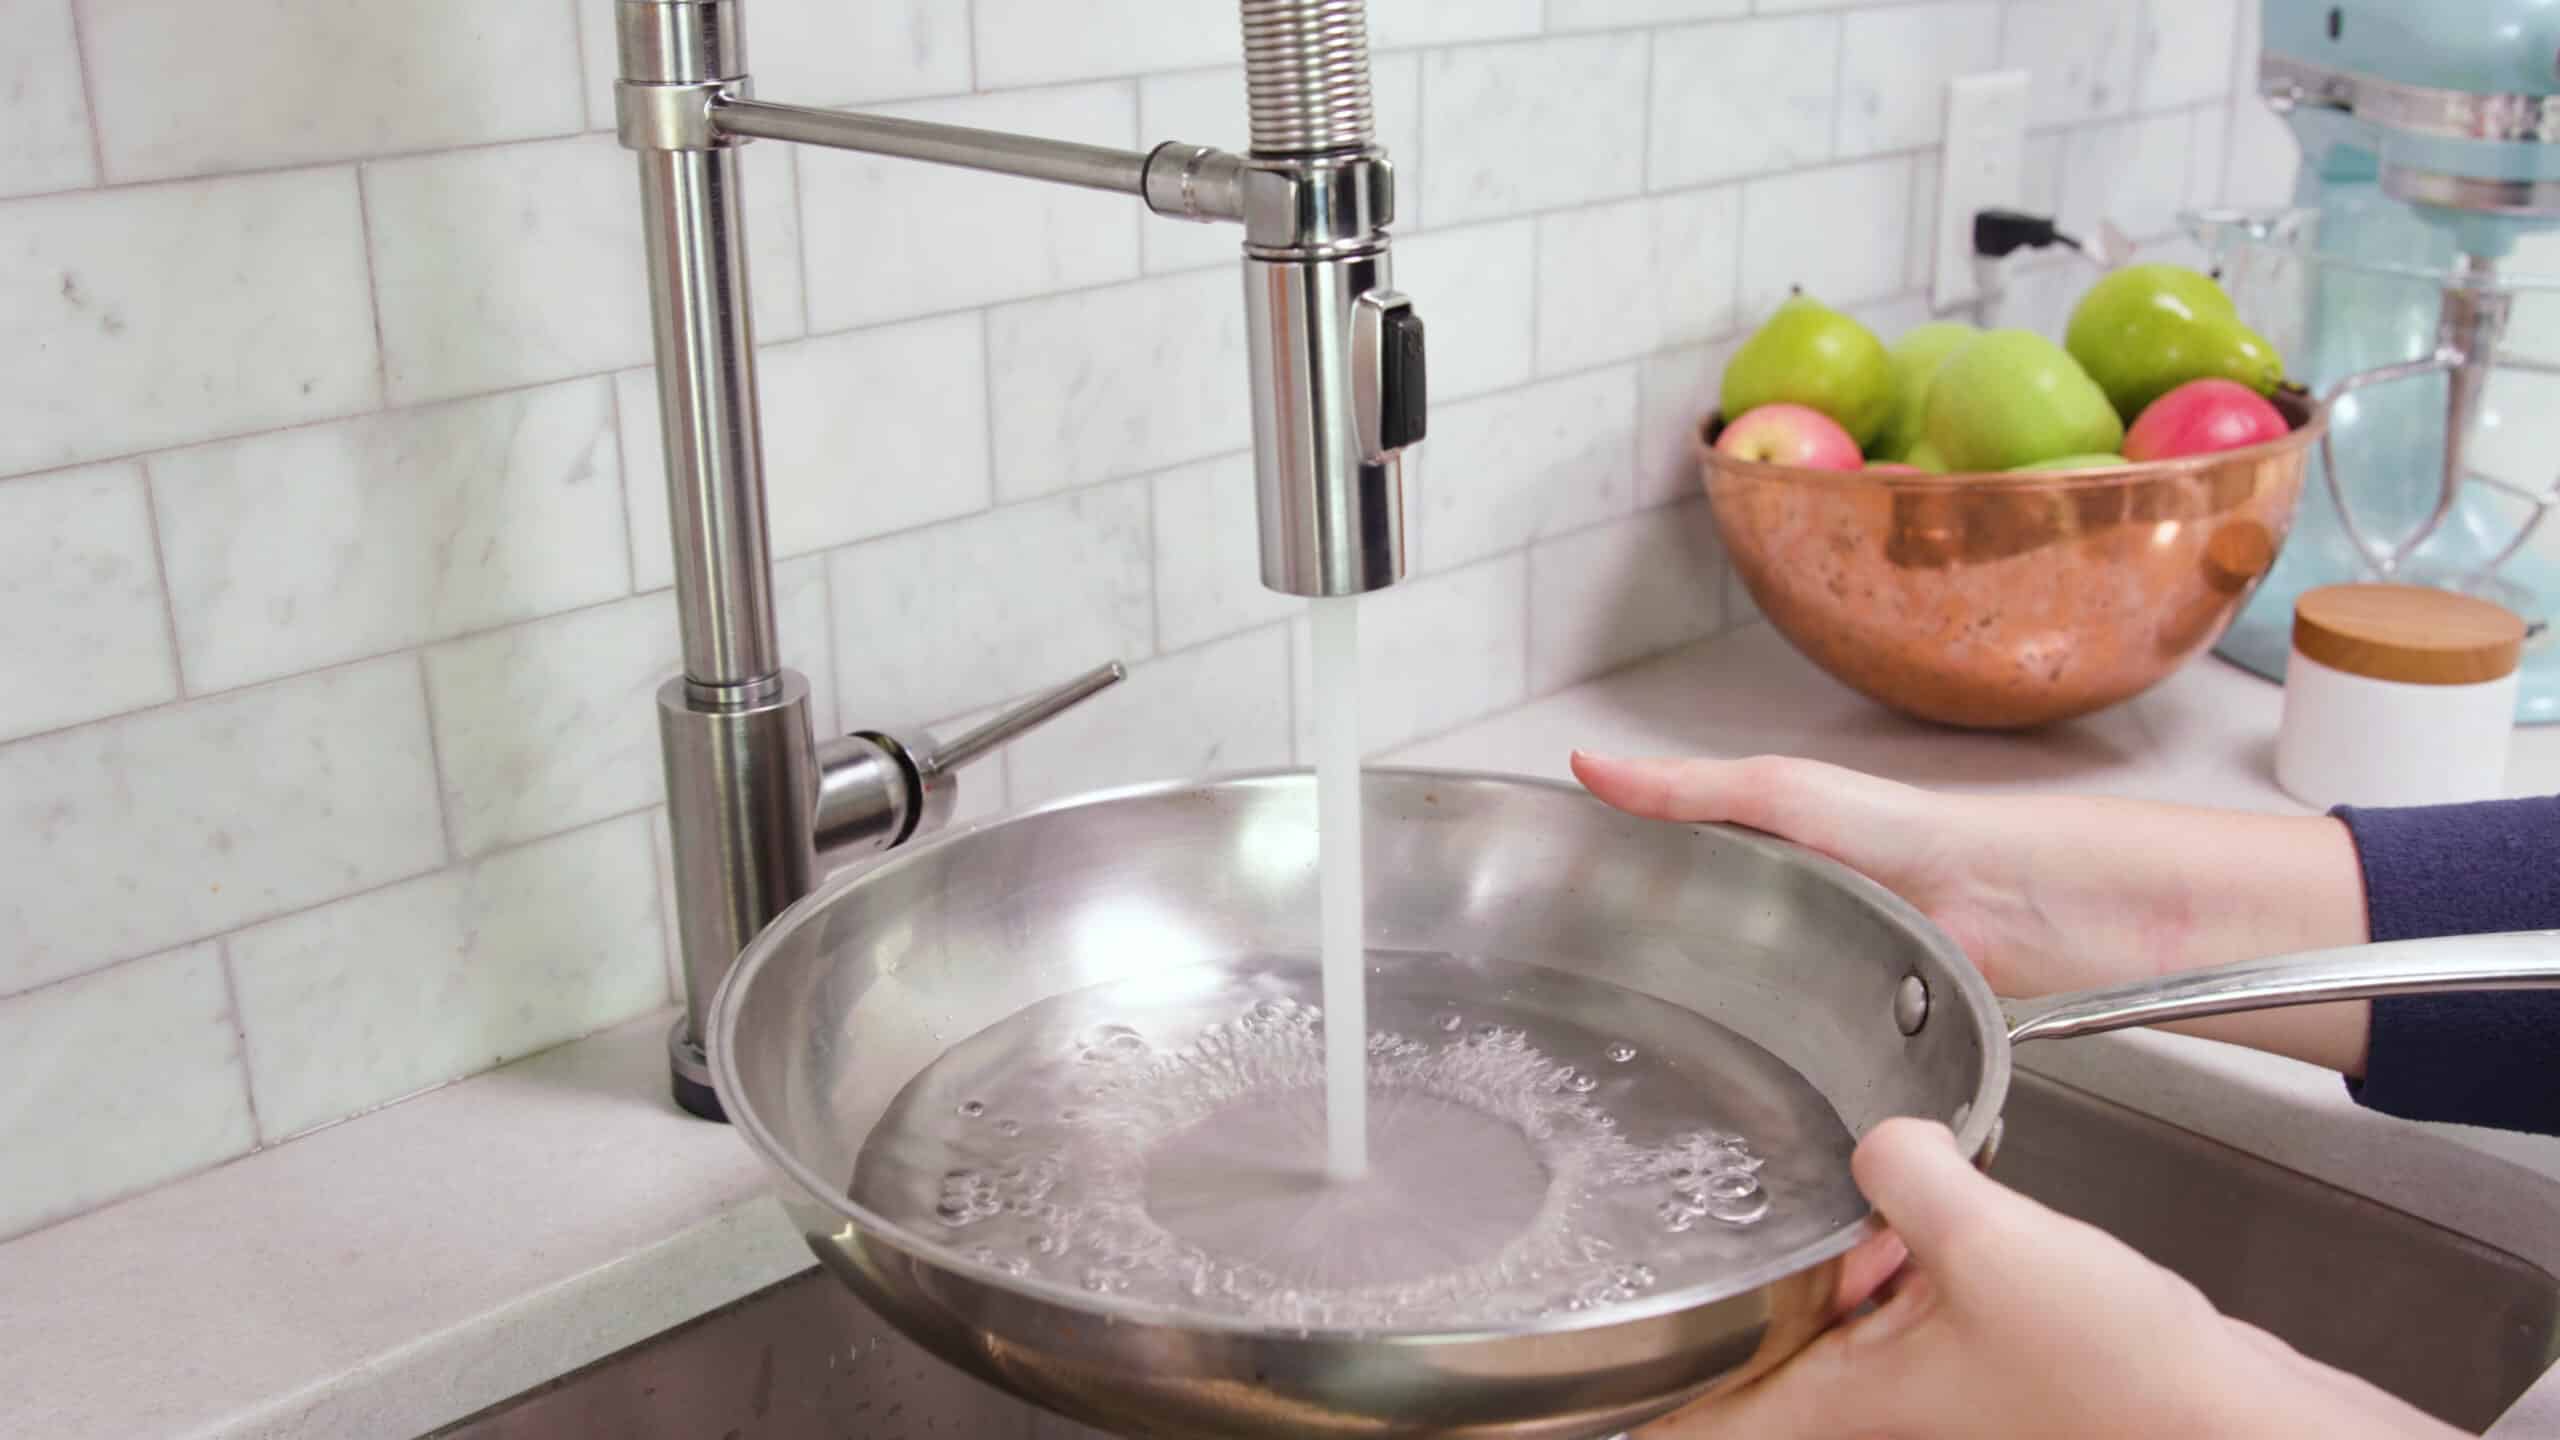 Fill a silver saucepan about half way full with water from faucet.